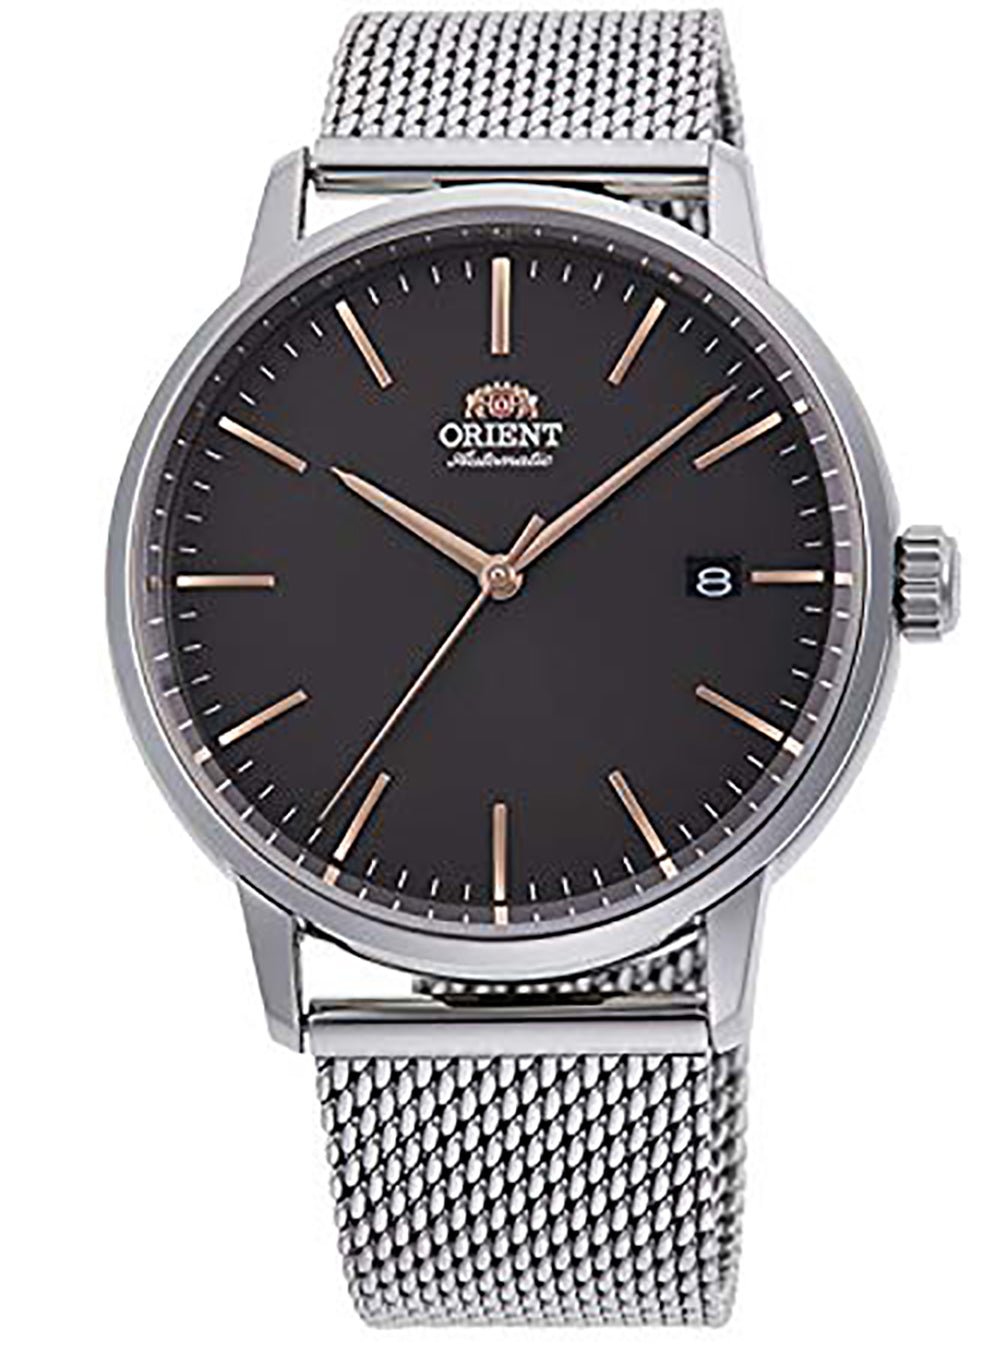 ORIENT CONTEMPORARY BASIC CONCEPT RN-AC0E05N MADE IN JAPAN JDM (Japanese Domestic Market)WRISTWATCHjapan-select